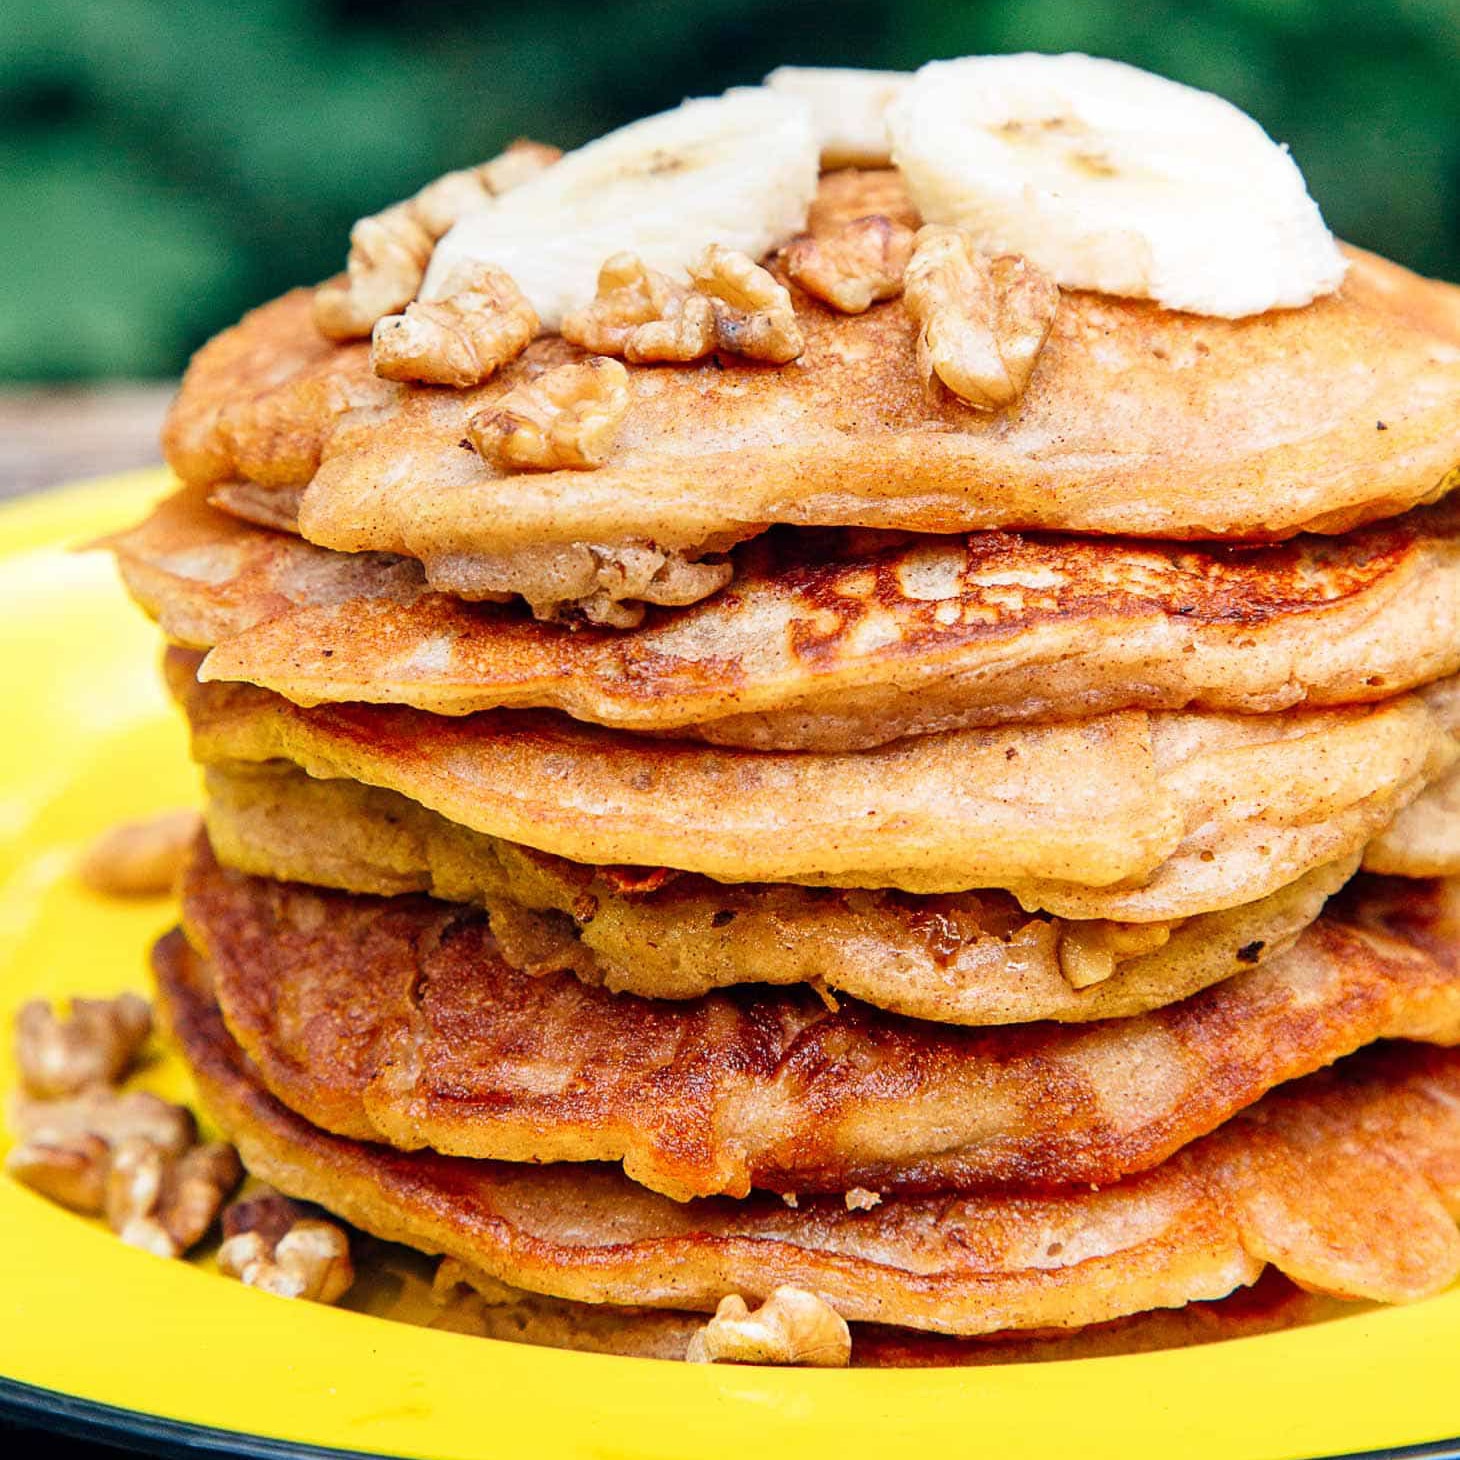 A stack of pancakes topped with sliced bananas on a yellow plate.